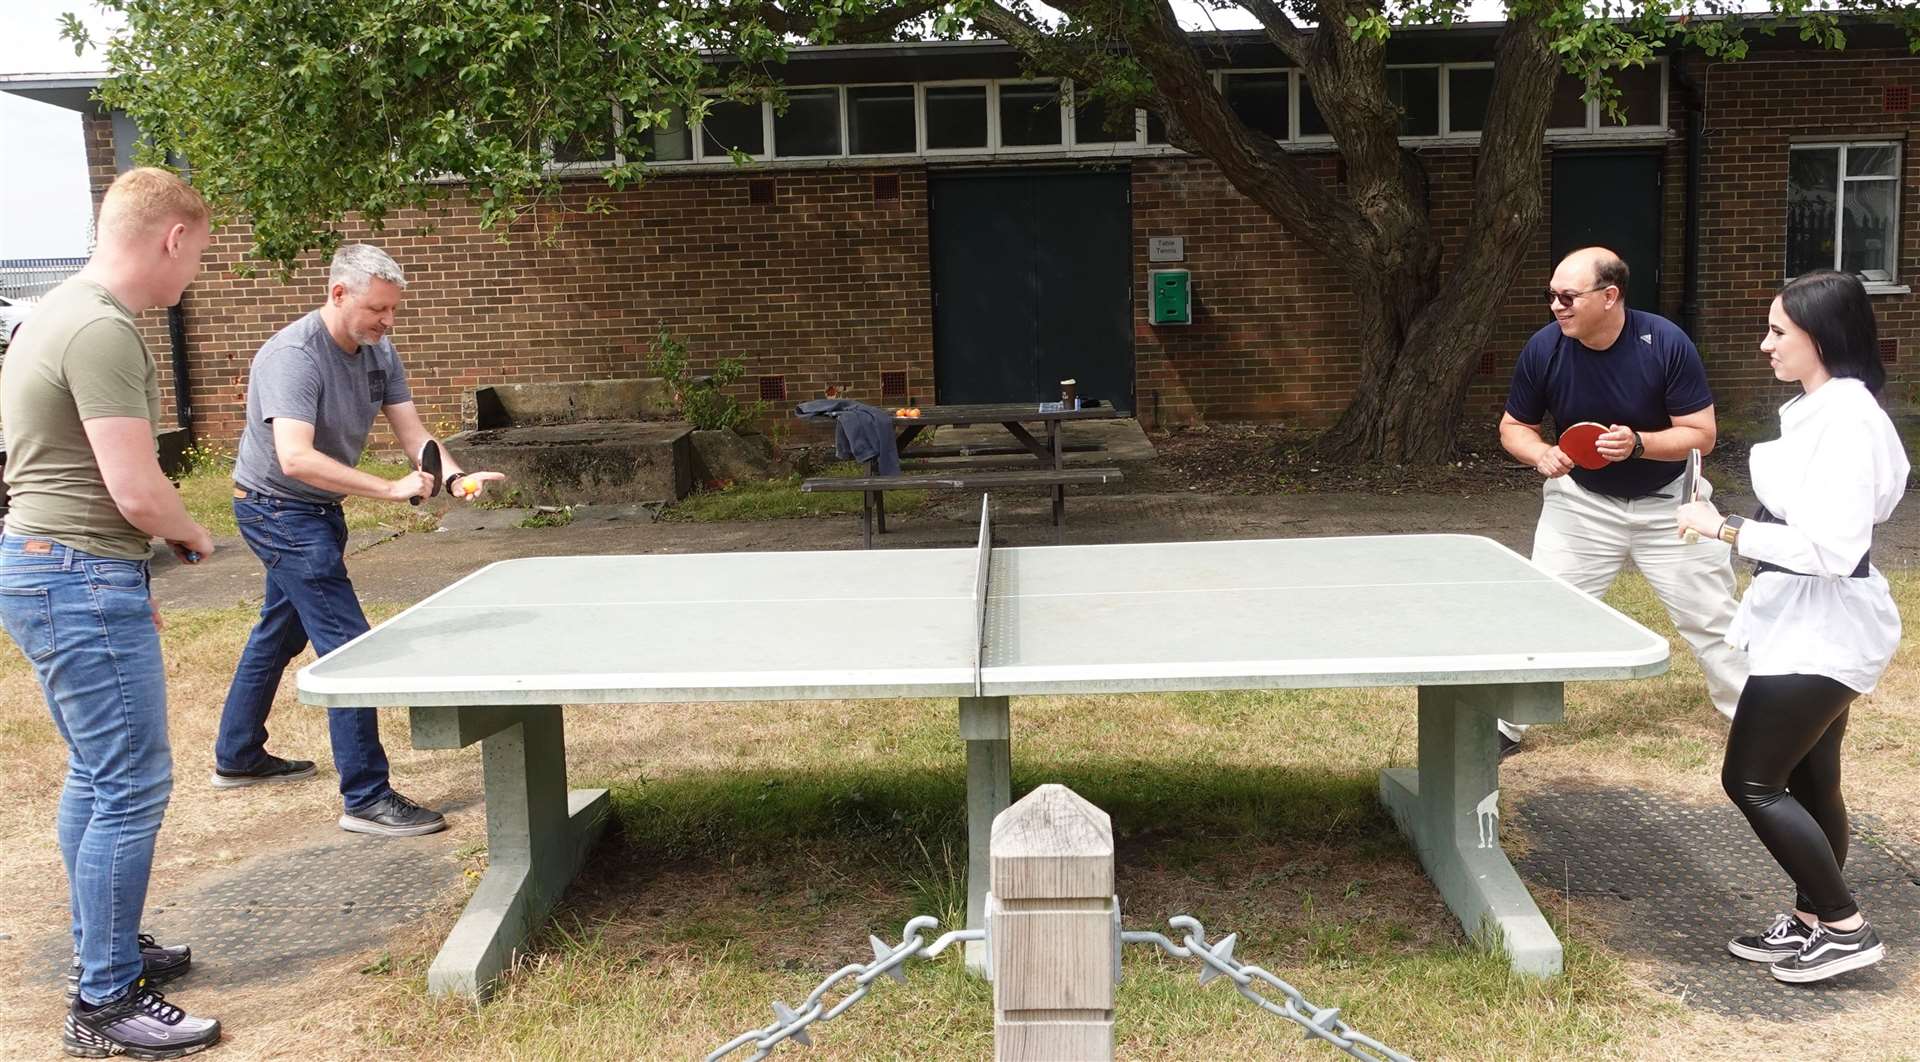 Employees enjoying a game of table tennis on site.